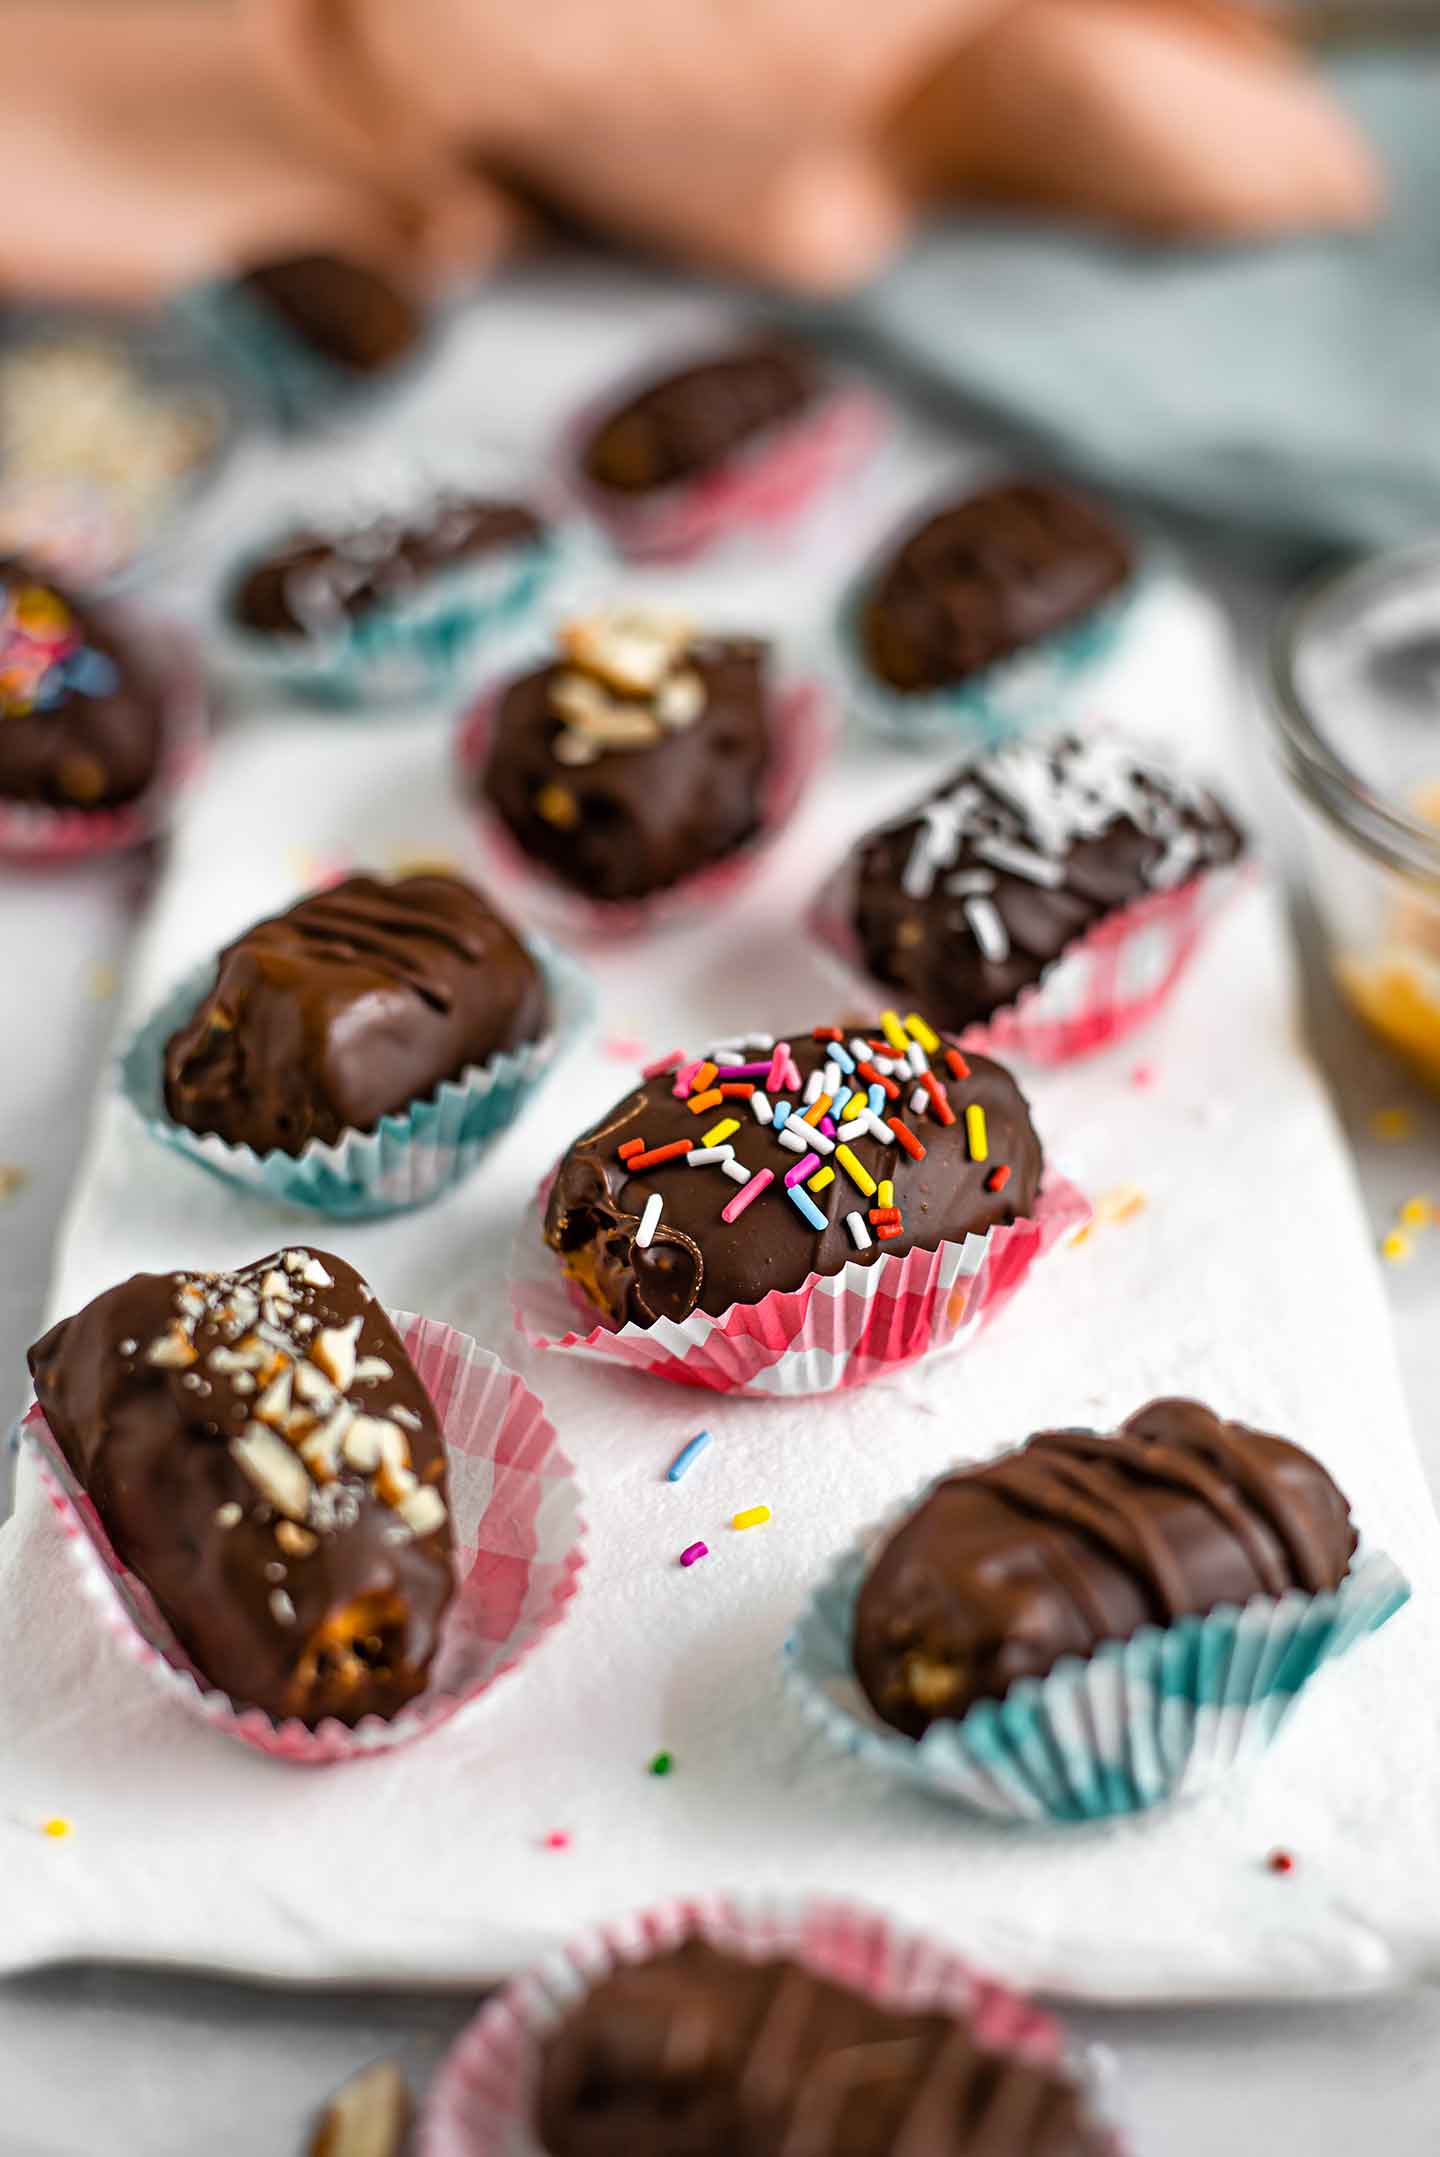 Side view of chocolate covered peanut butter dates in colourful wrappers topped with sprinkles, coconut flakes, and crushed almonds.